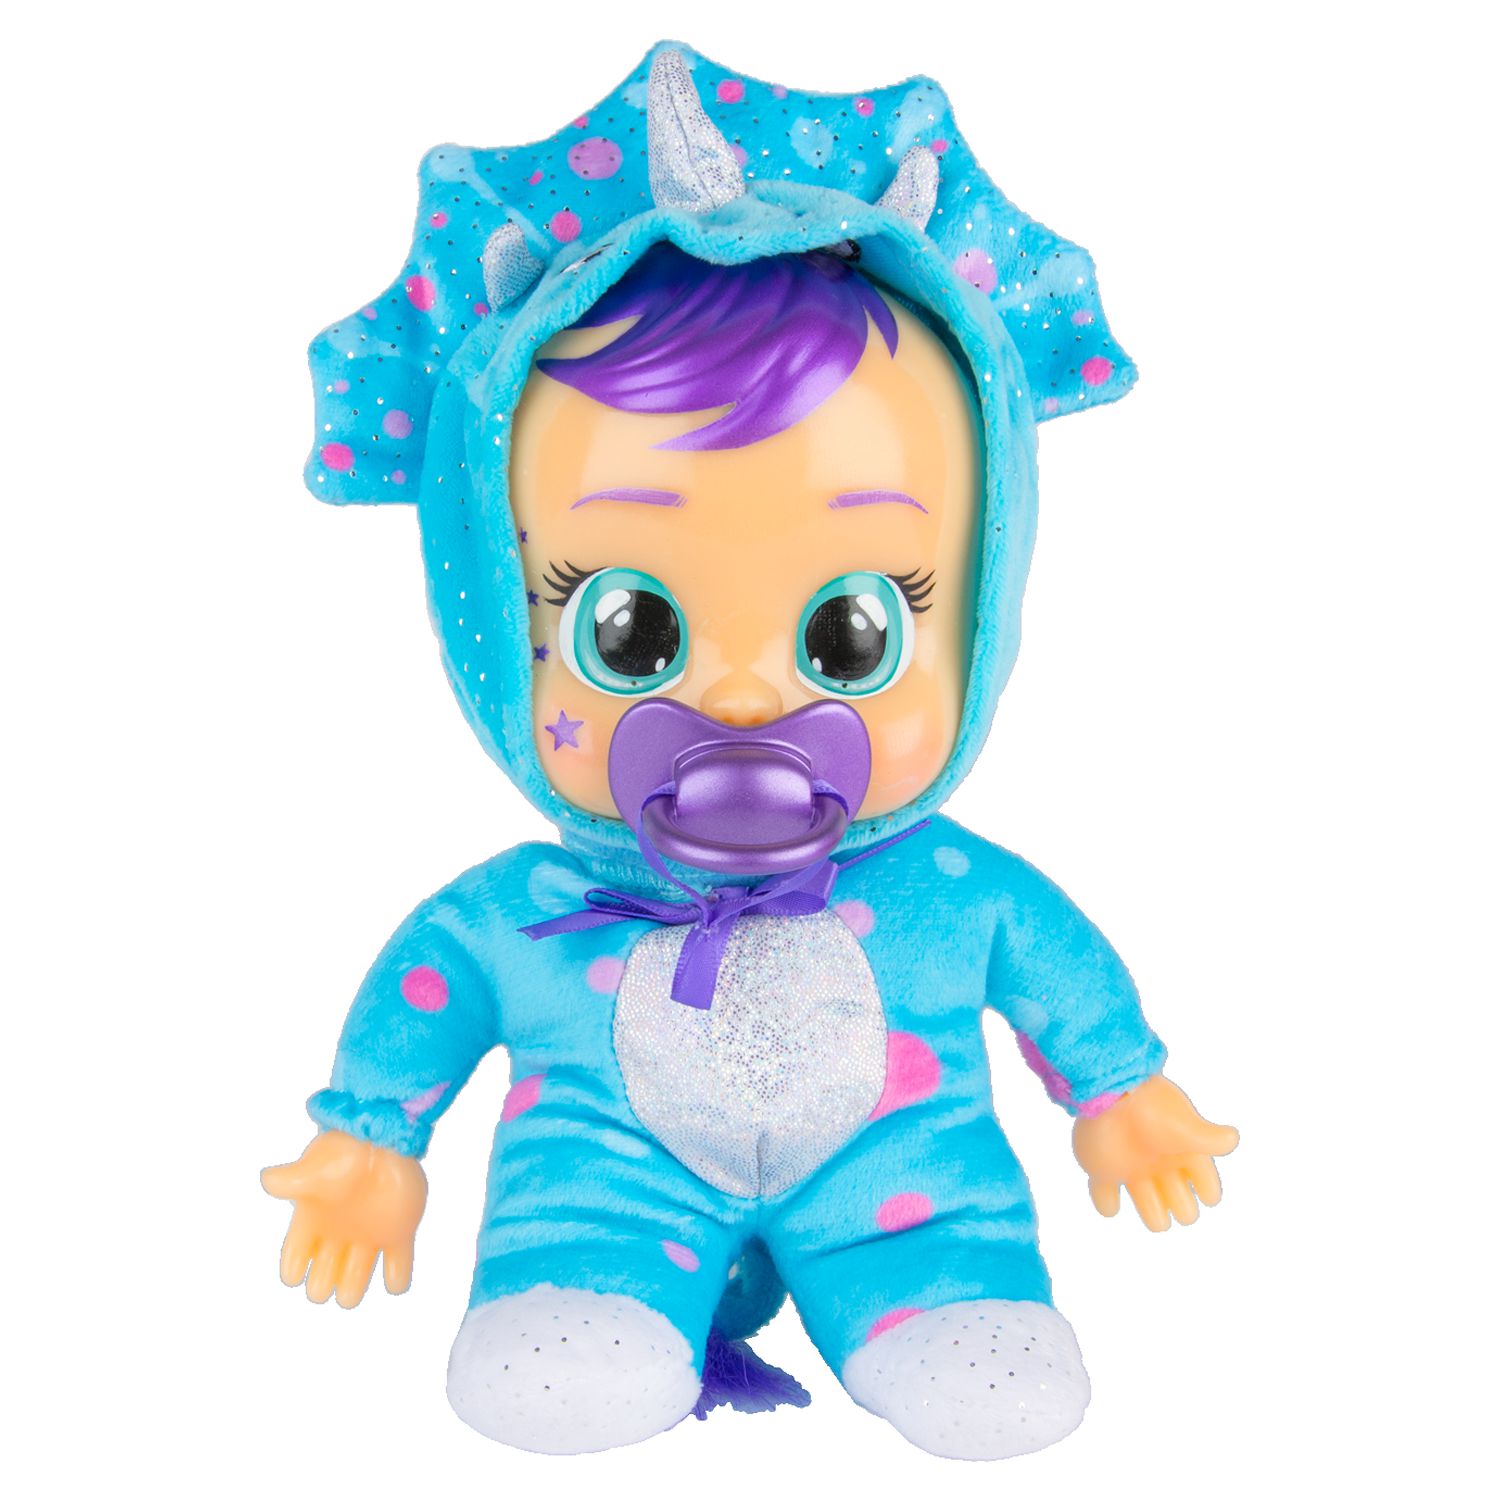 Cry Babies Tiny Cuddles 9 inch Baby Doll (Styles Vary) Ages 18+ months - image 4 of 11